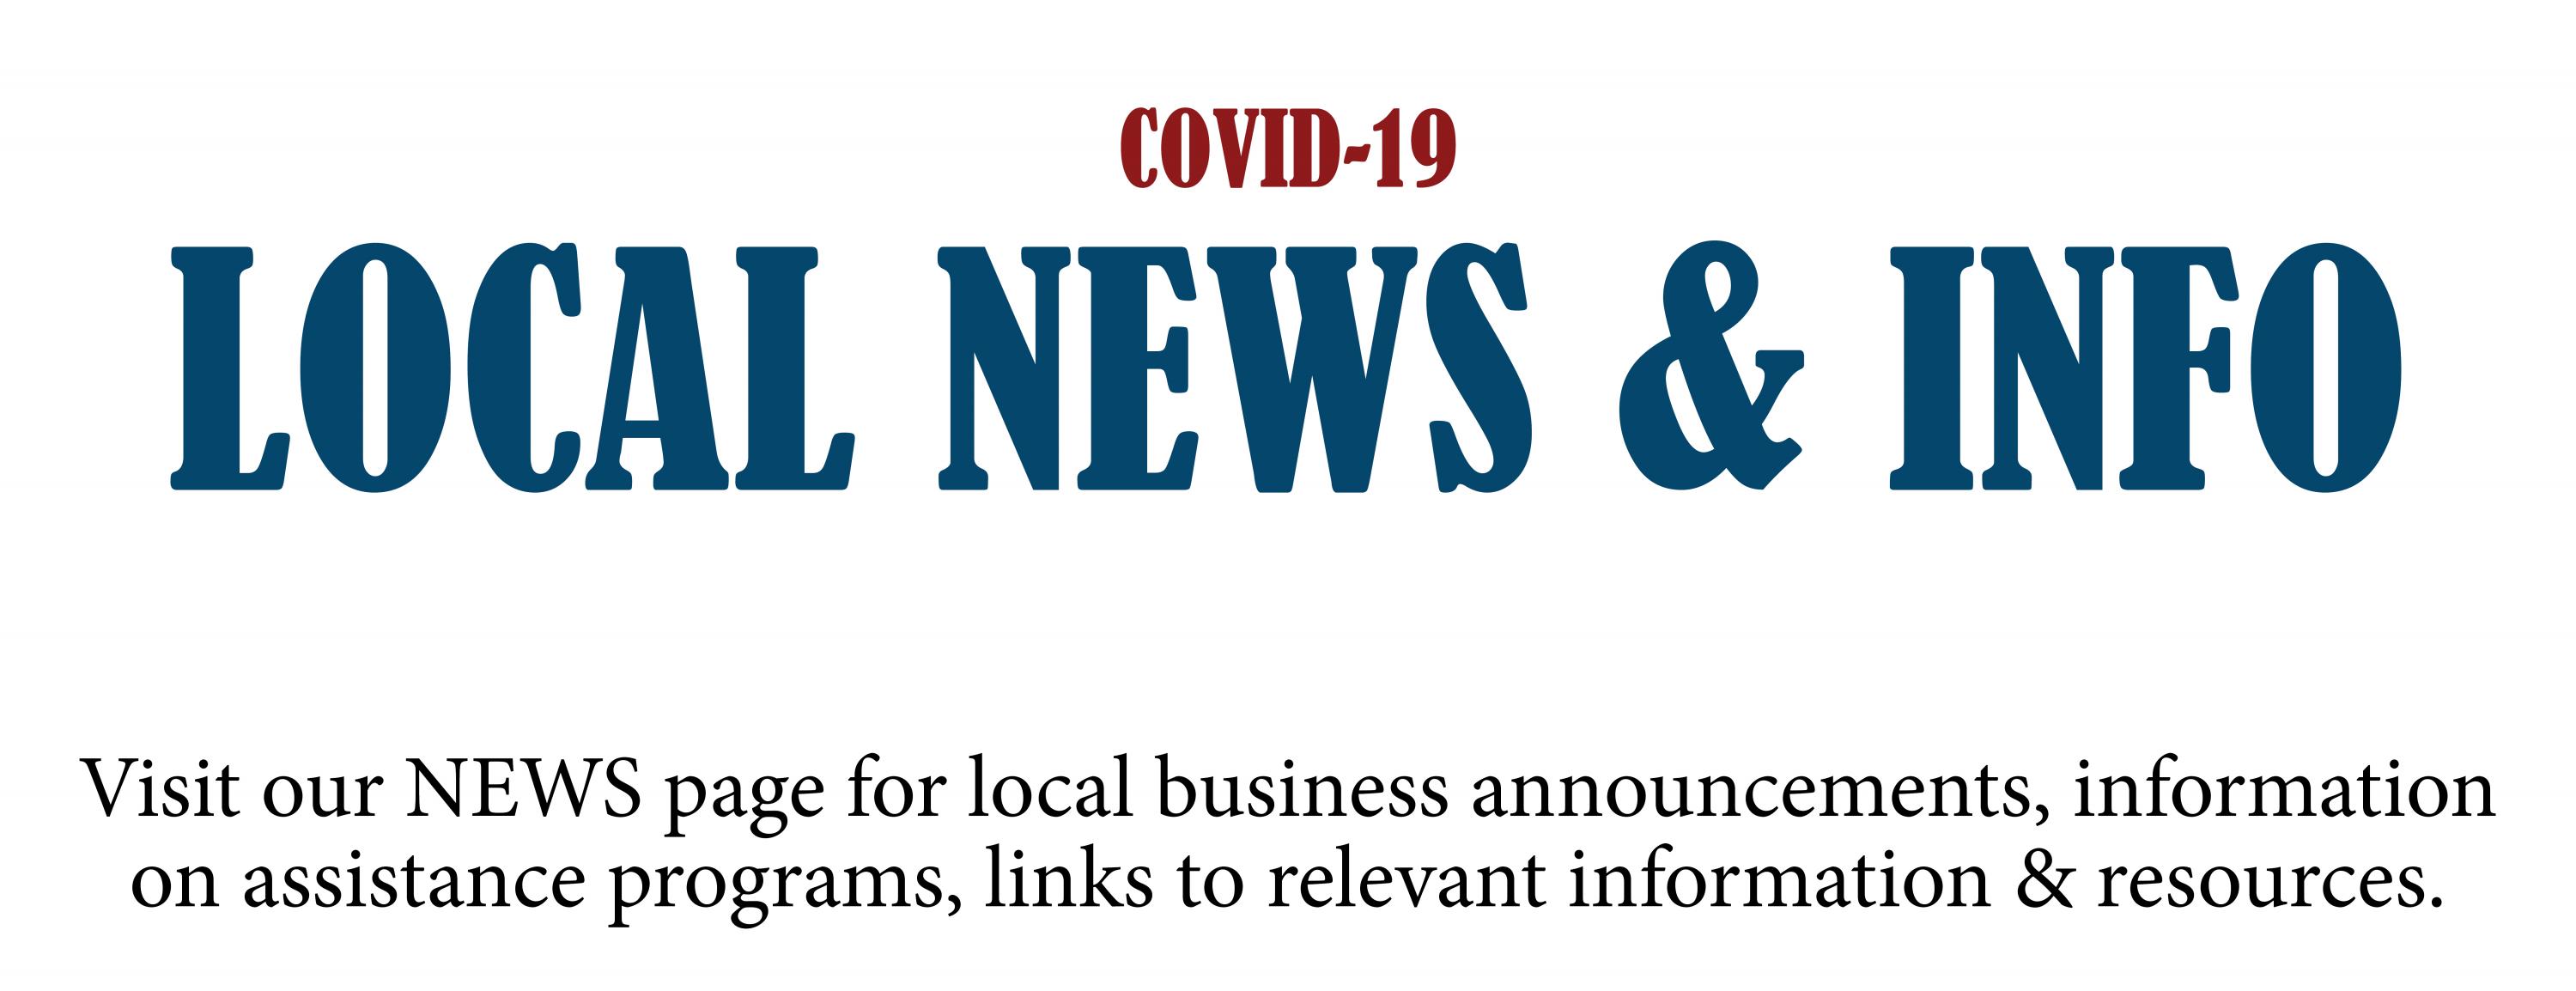 Visit the COVID-19 News & Info page on our Chamber site for the latest local updates Main Photo